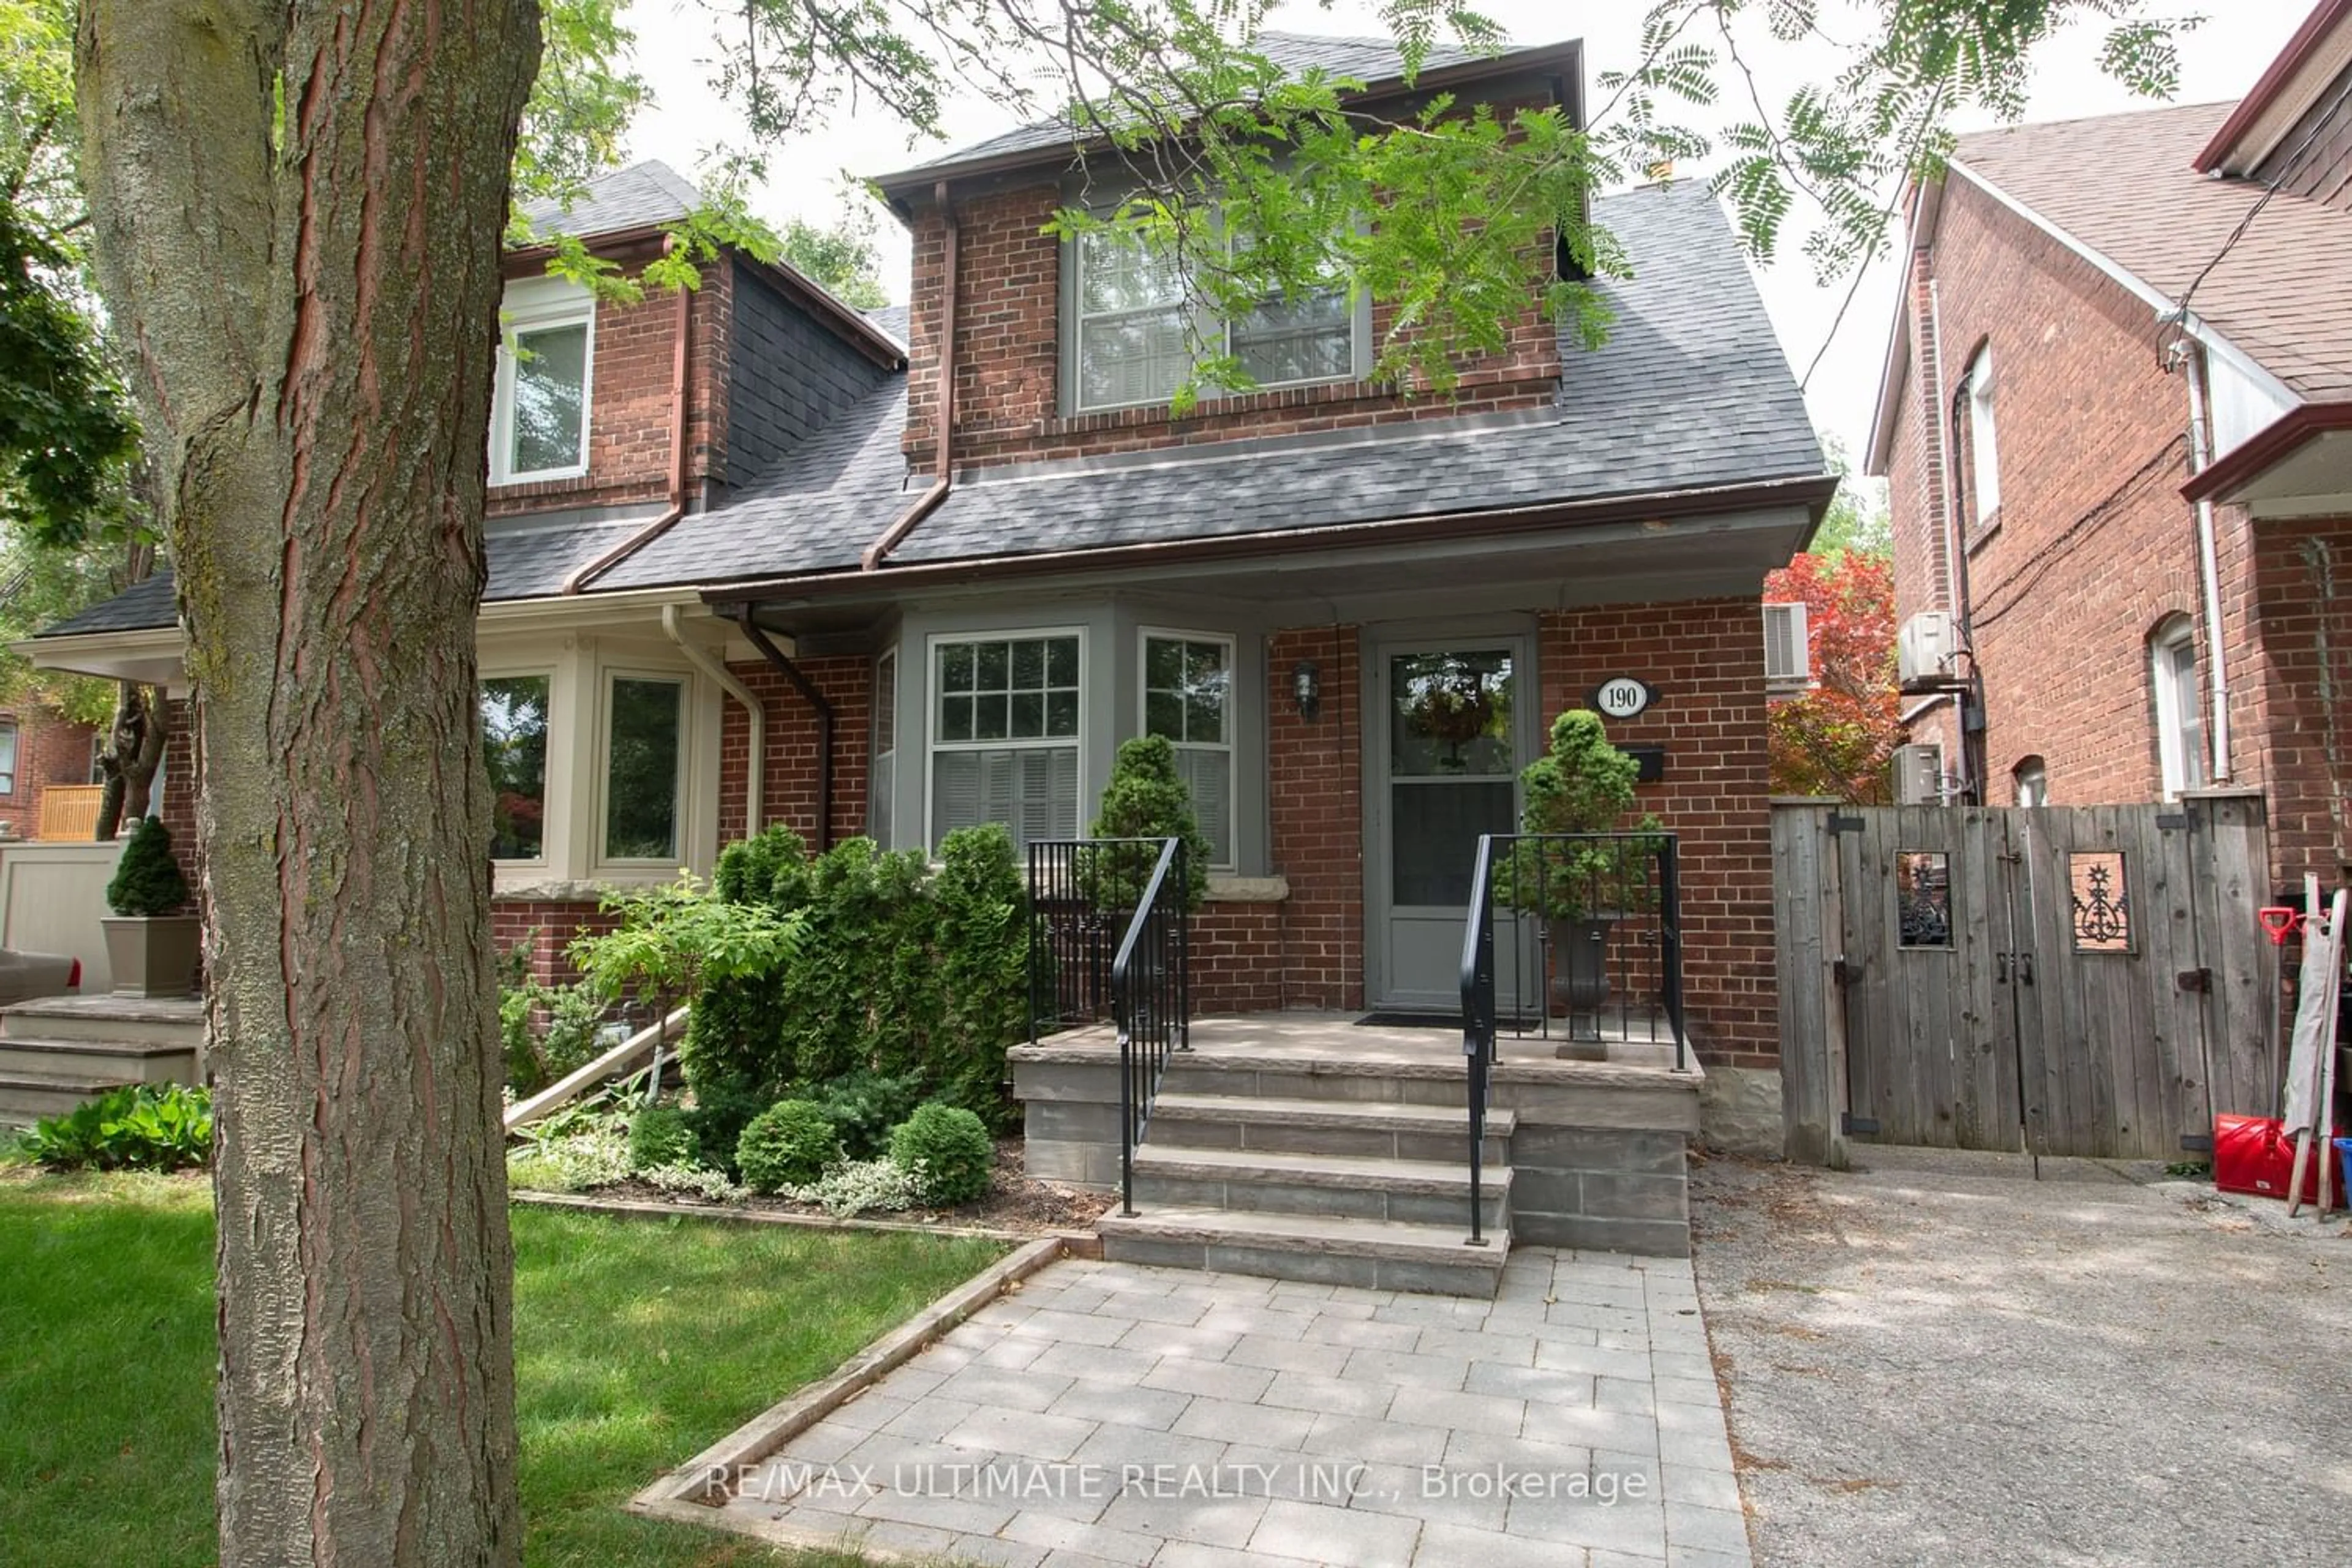 Home with brick exterior material for 190 Sutherland Dr, Toronto Ontario M4G 1J2